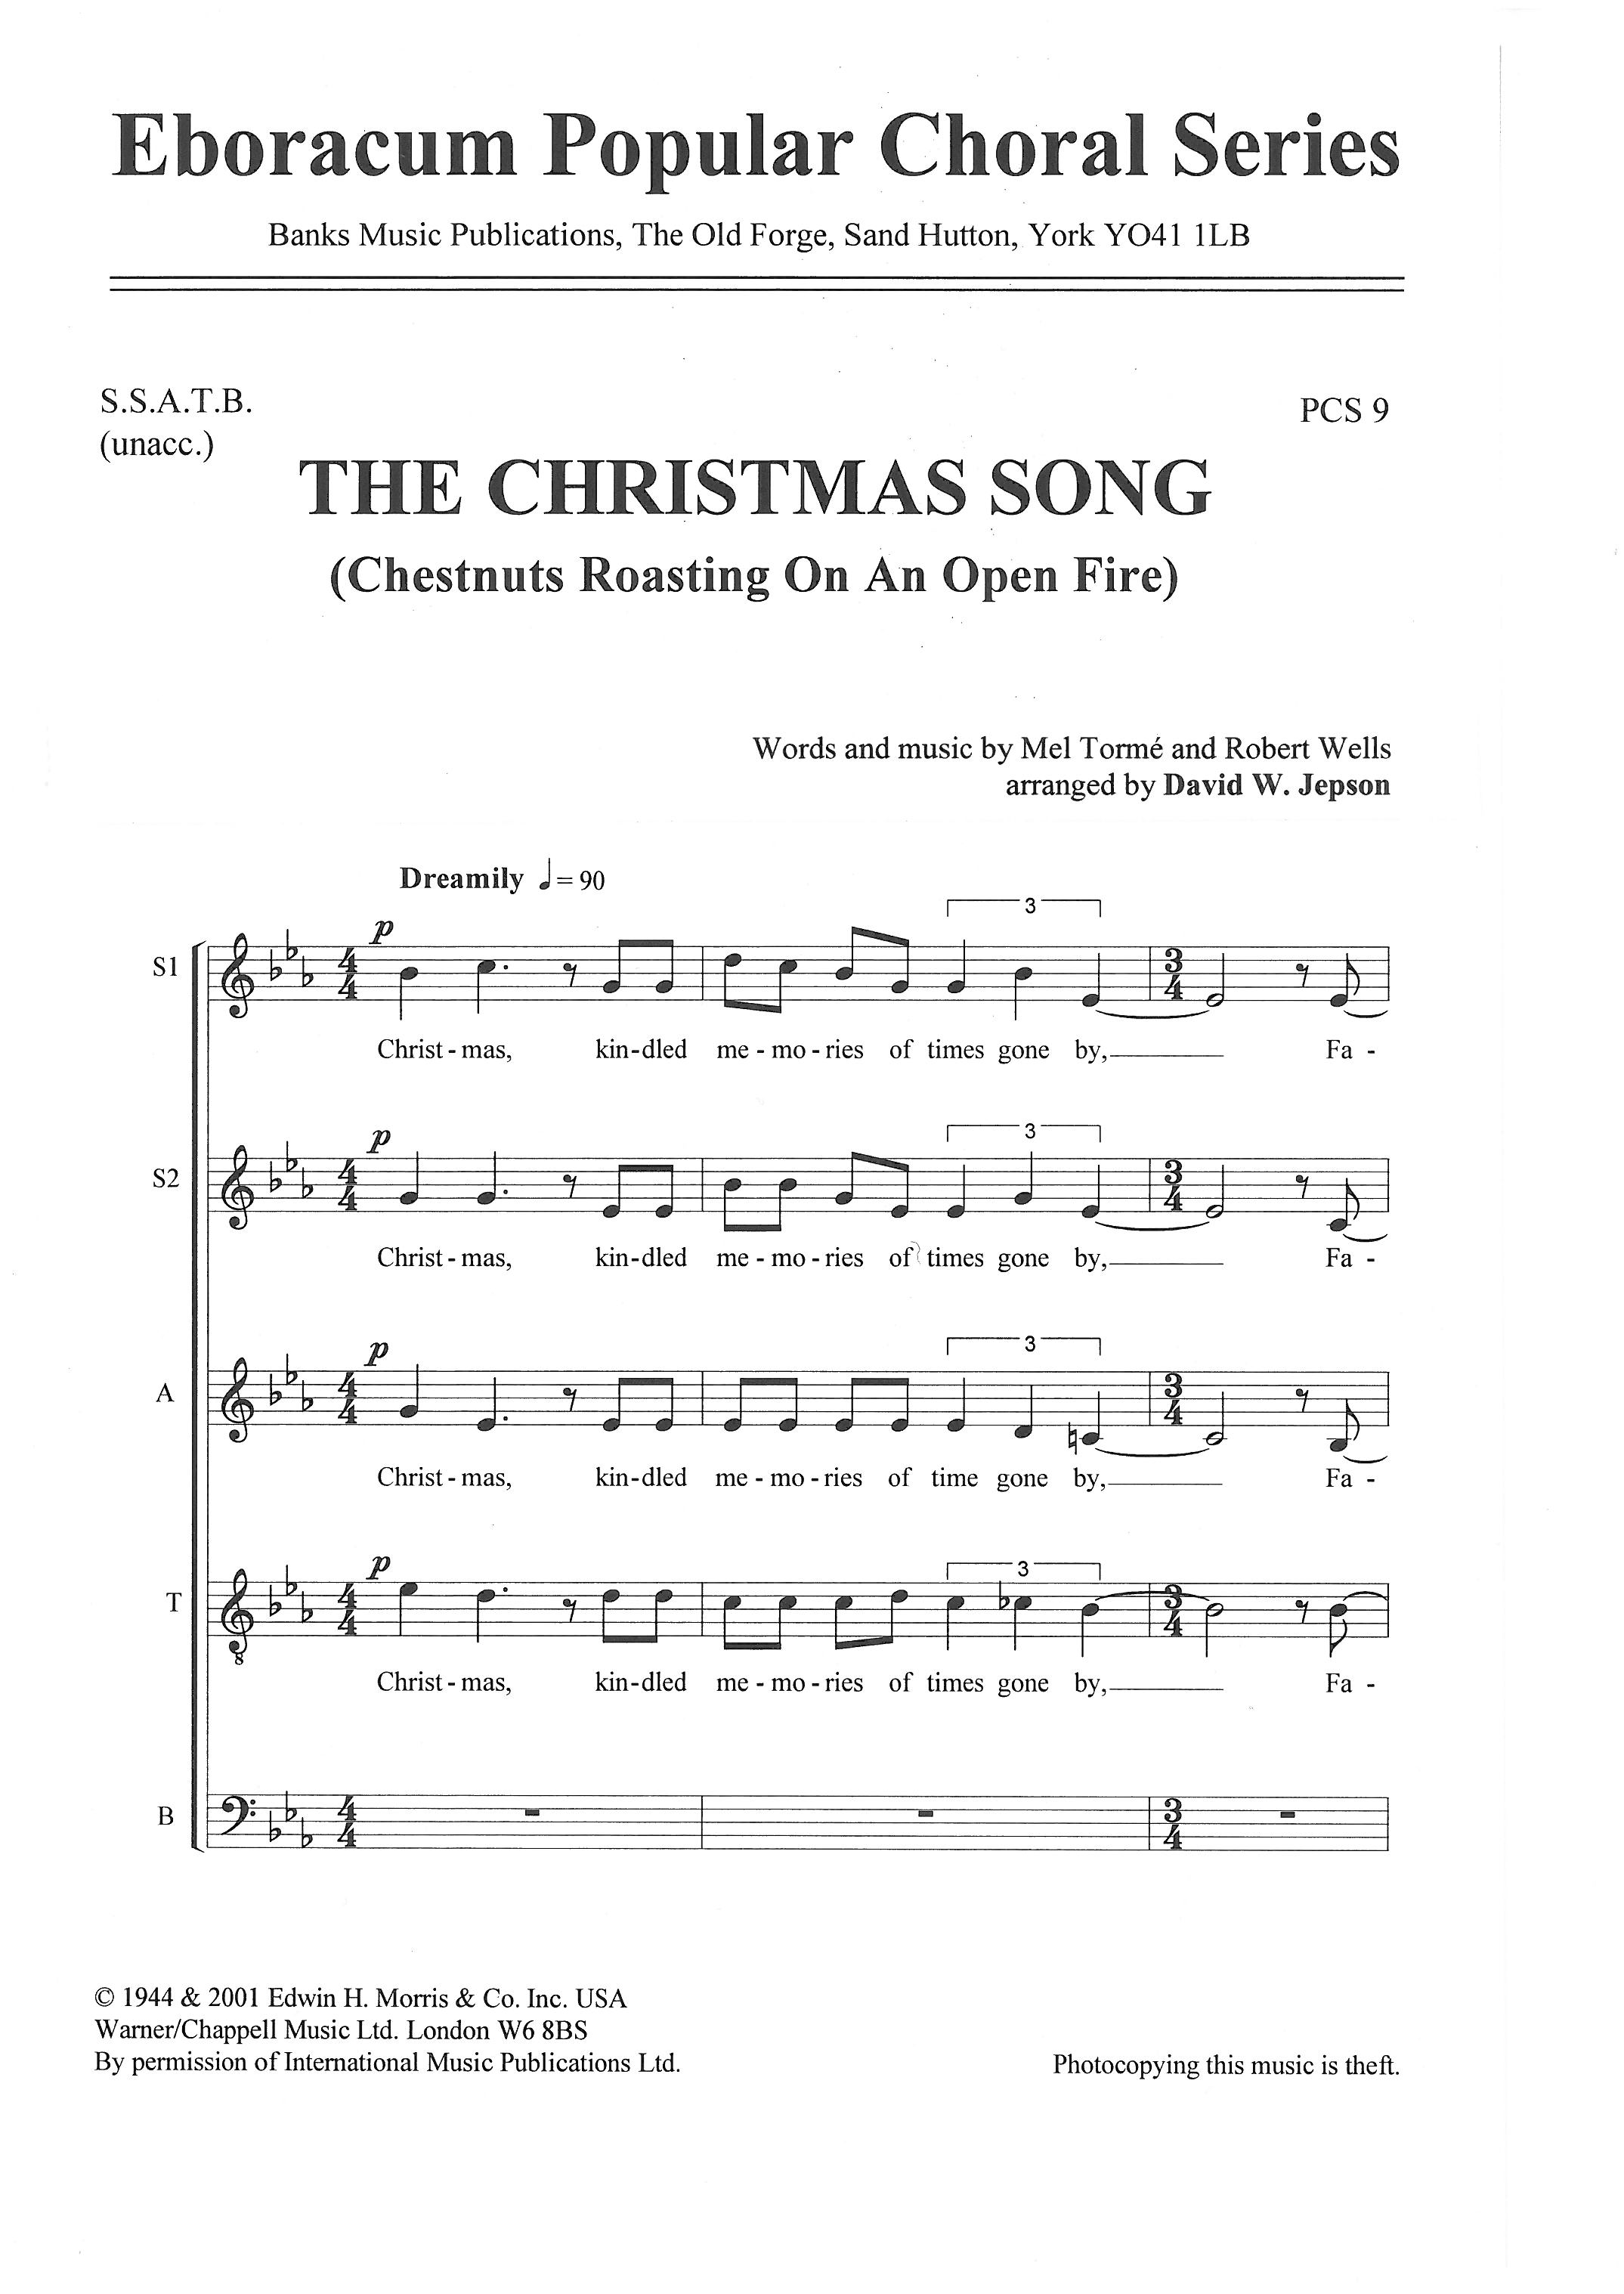 Mel Torme R. Wells: The Christmas Song: SATB: Vocal Score